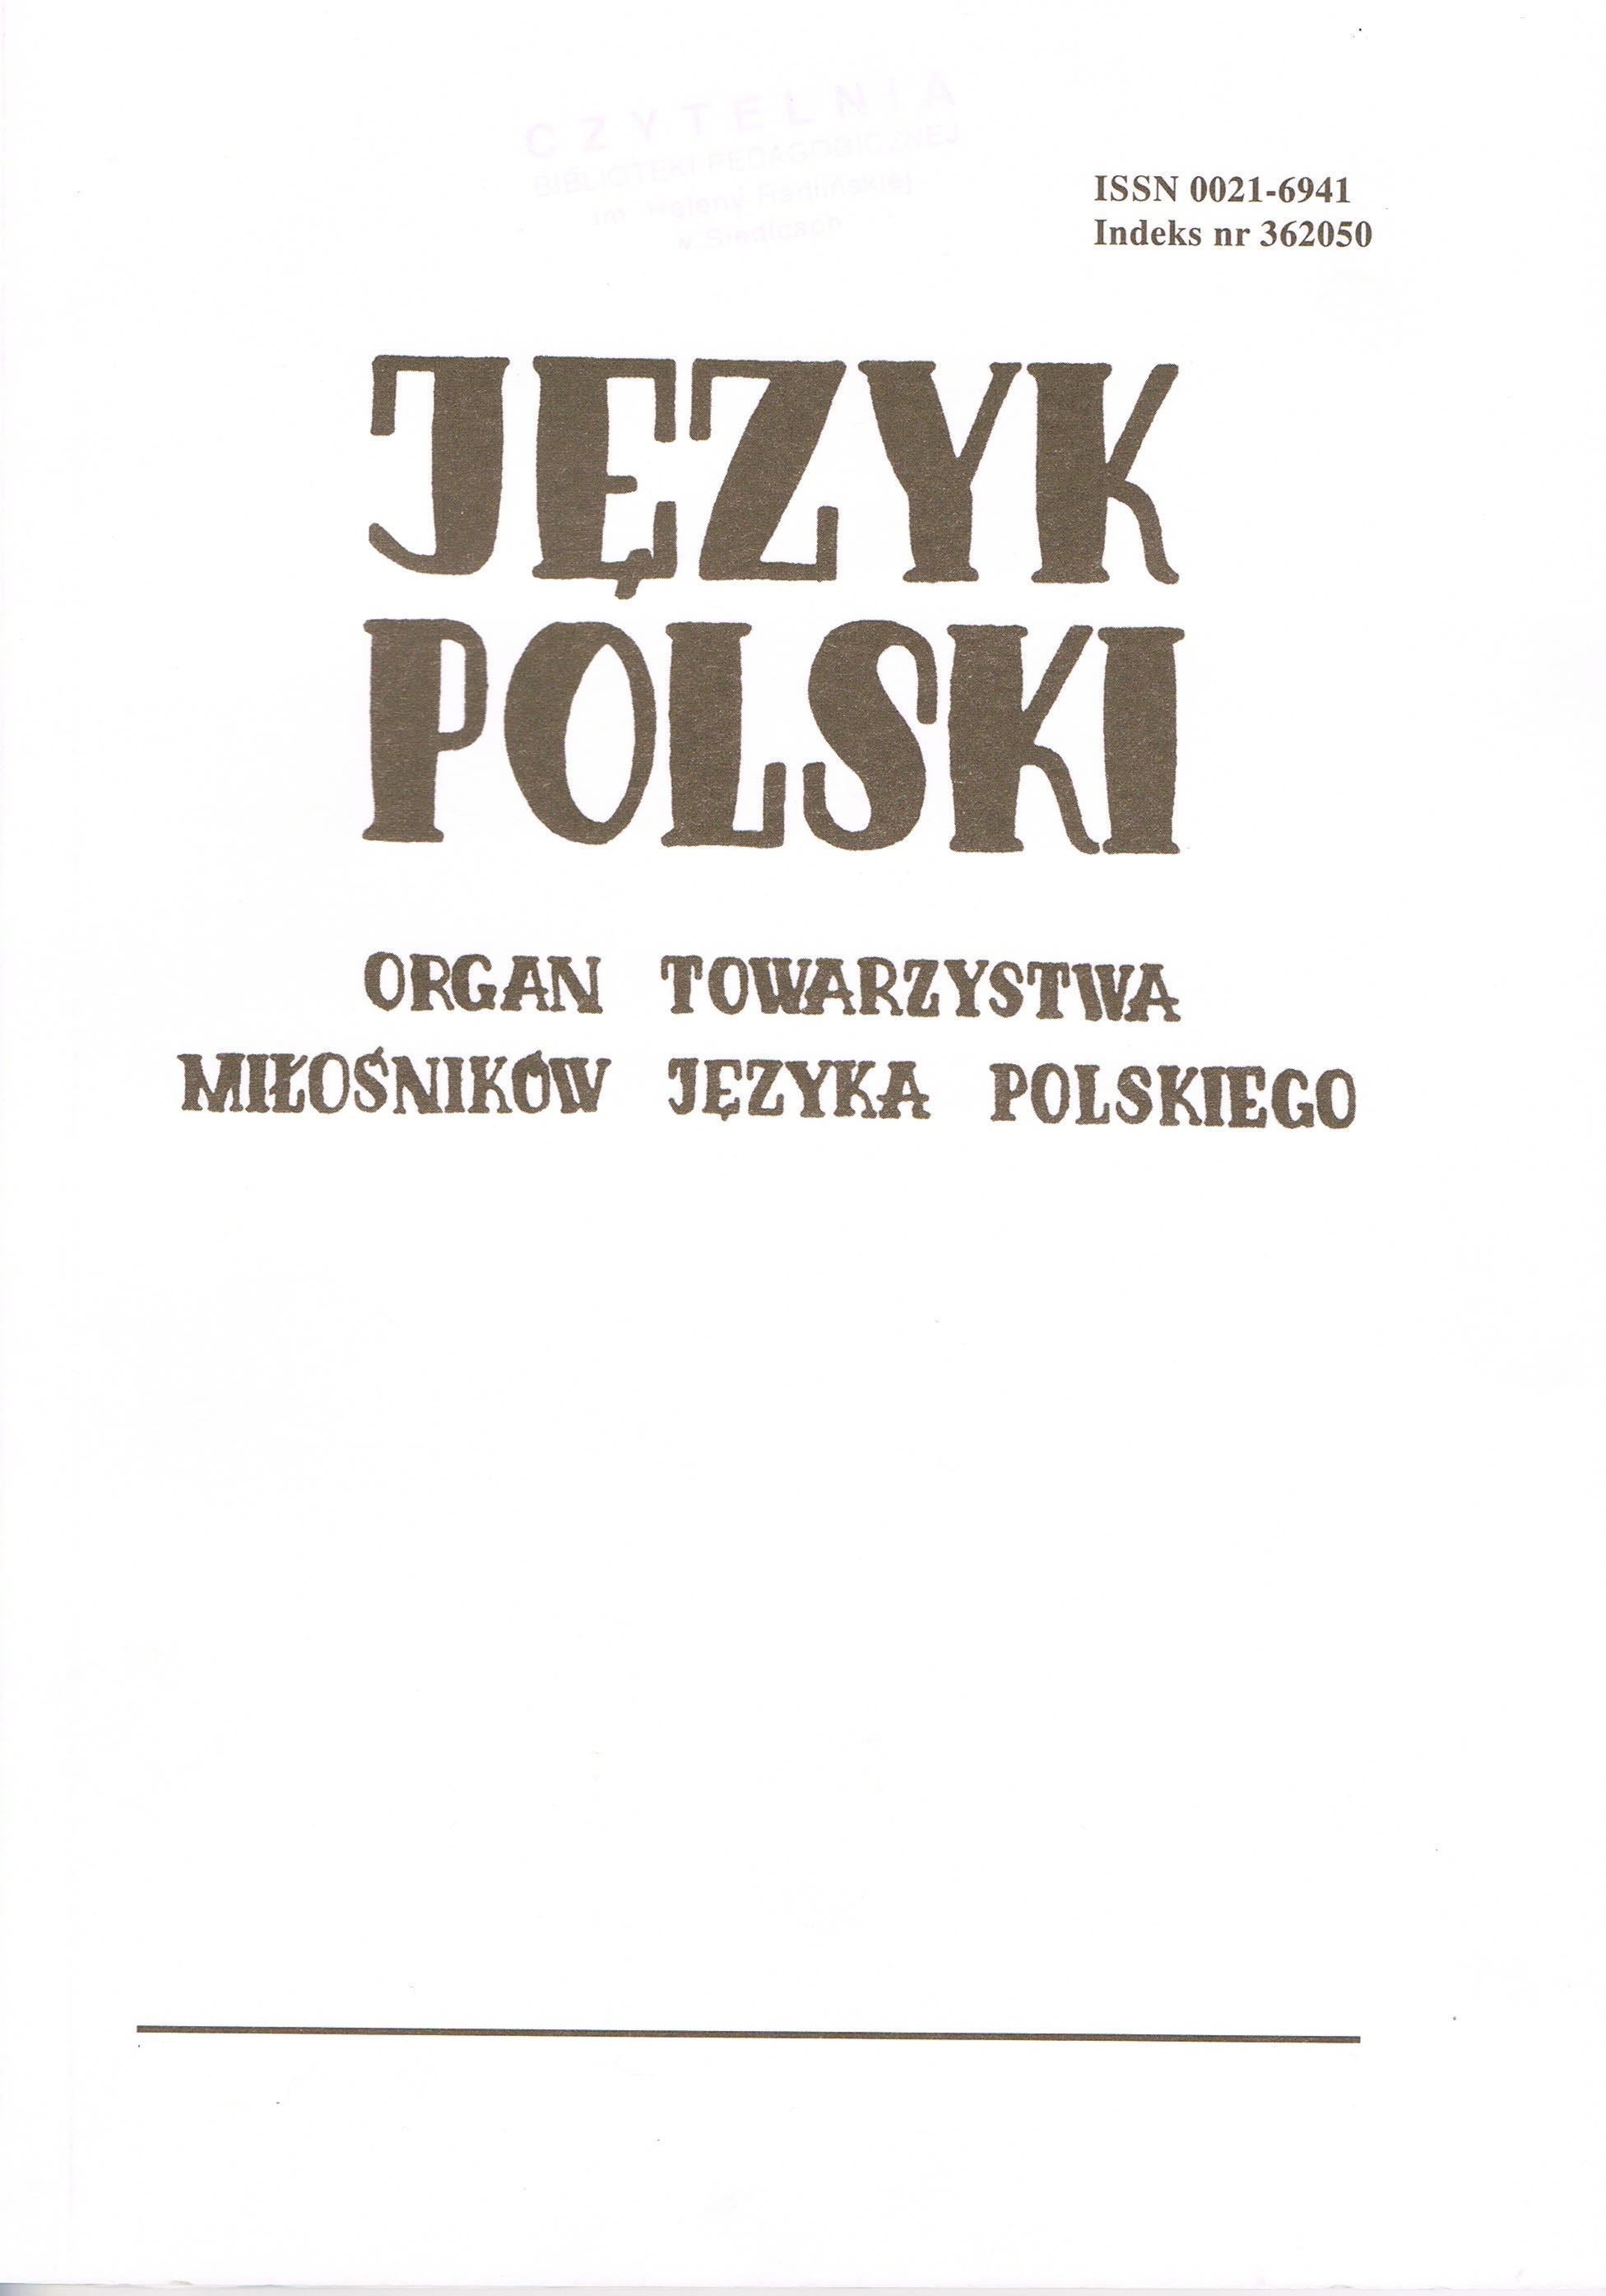 Linguistics in Polish studies in the 21st century – jubilee questionnaire of 